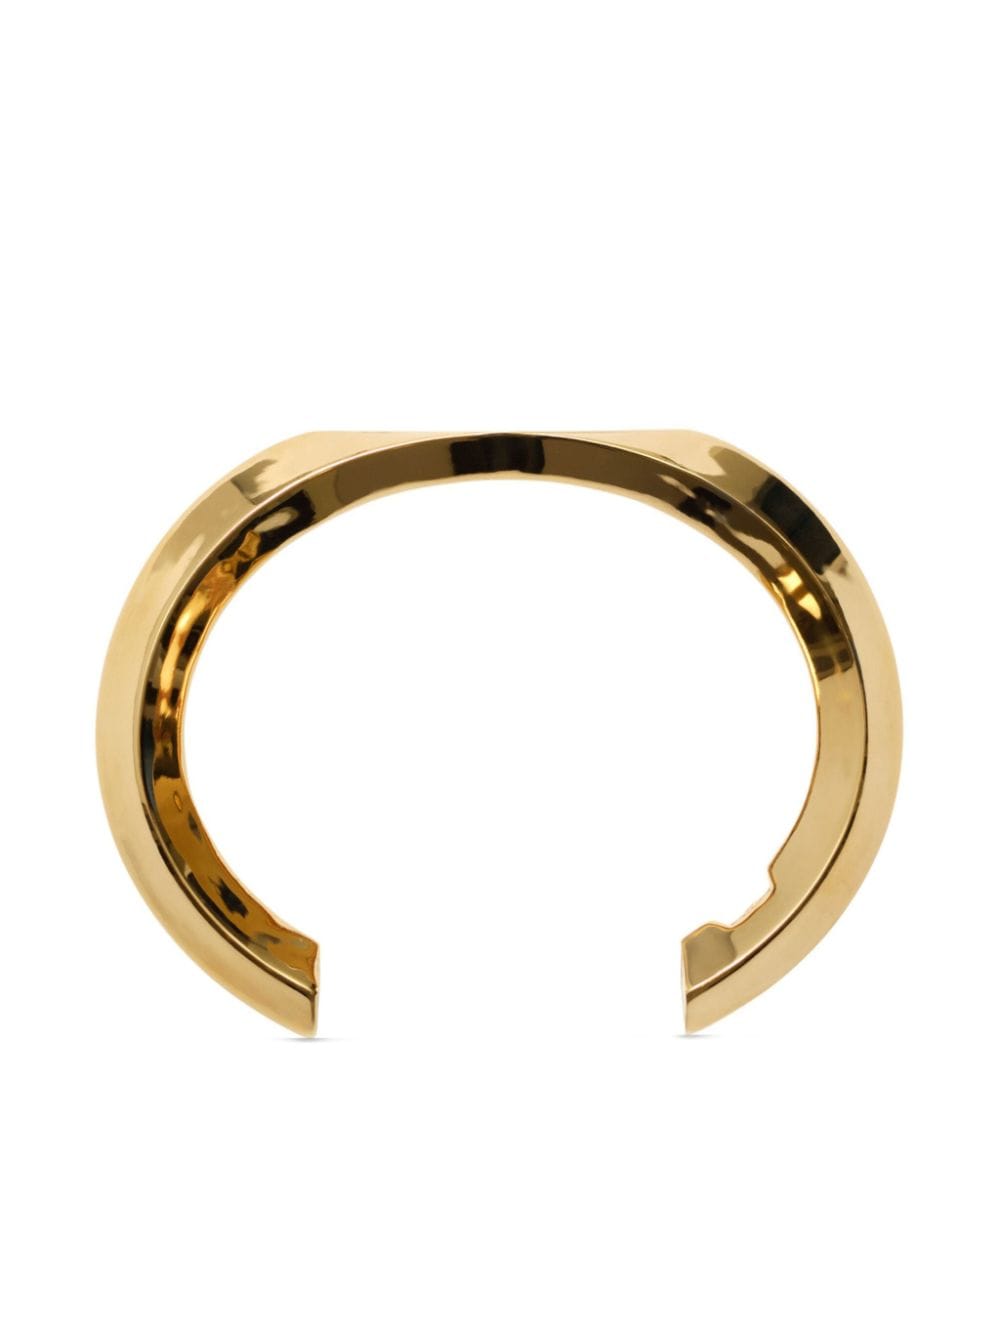 Burberry polished-finish hollow cuff - Gold von Burberry